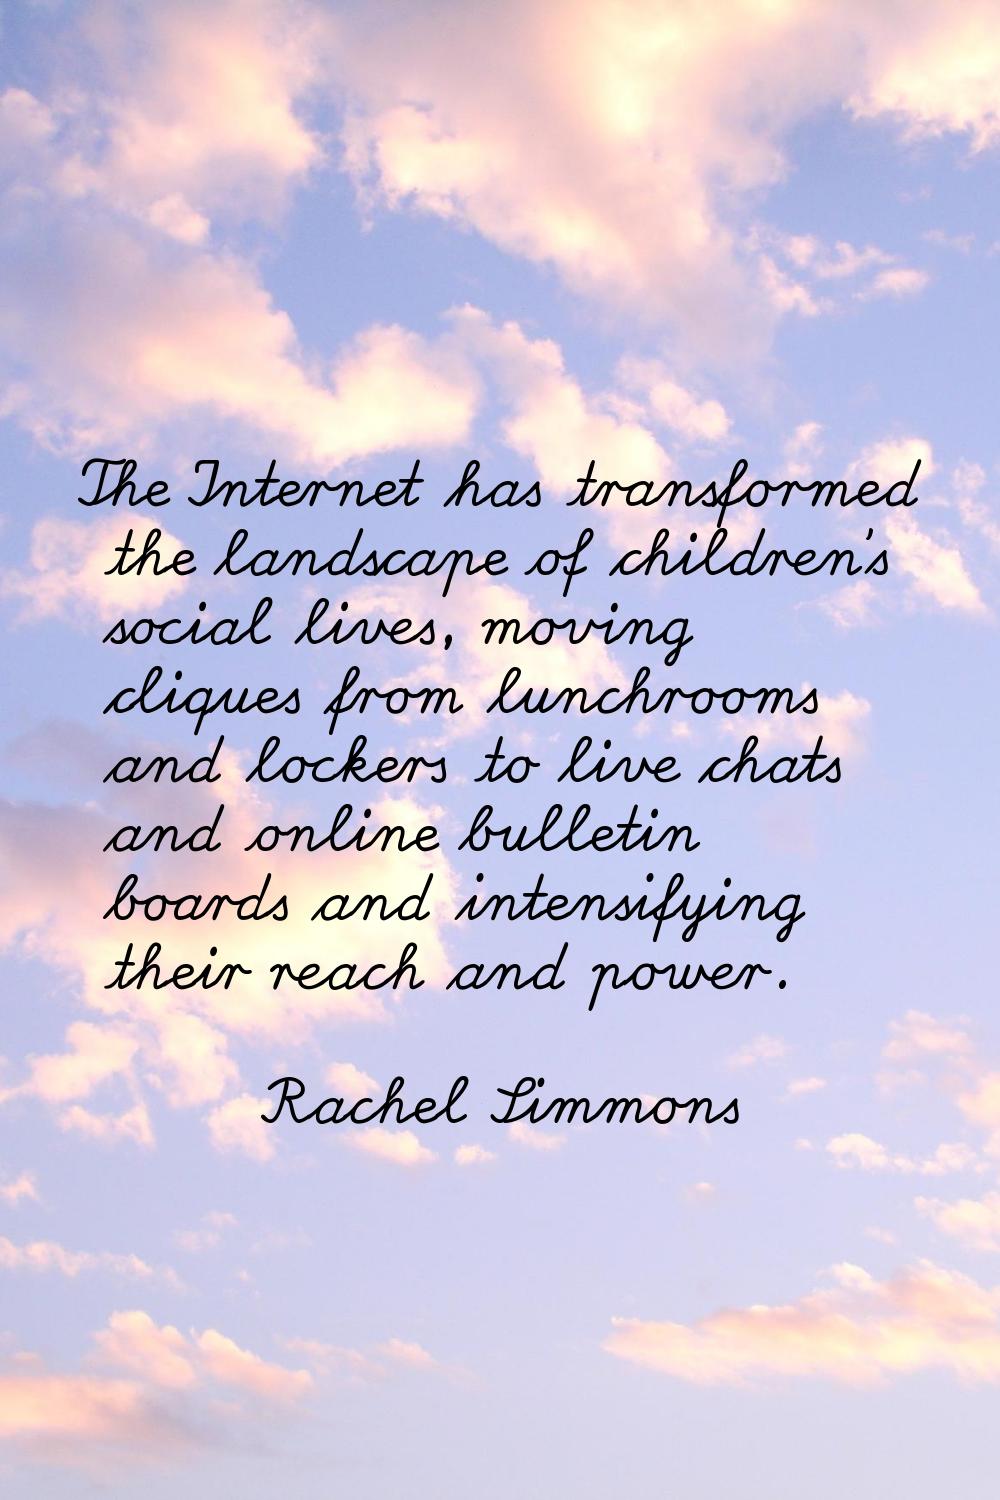 The Internet has transformed the landscape of children's social lives, moving cliques from lunchroo